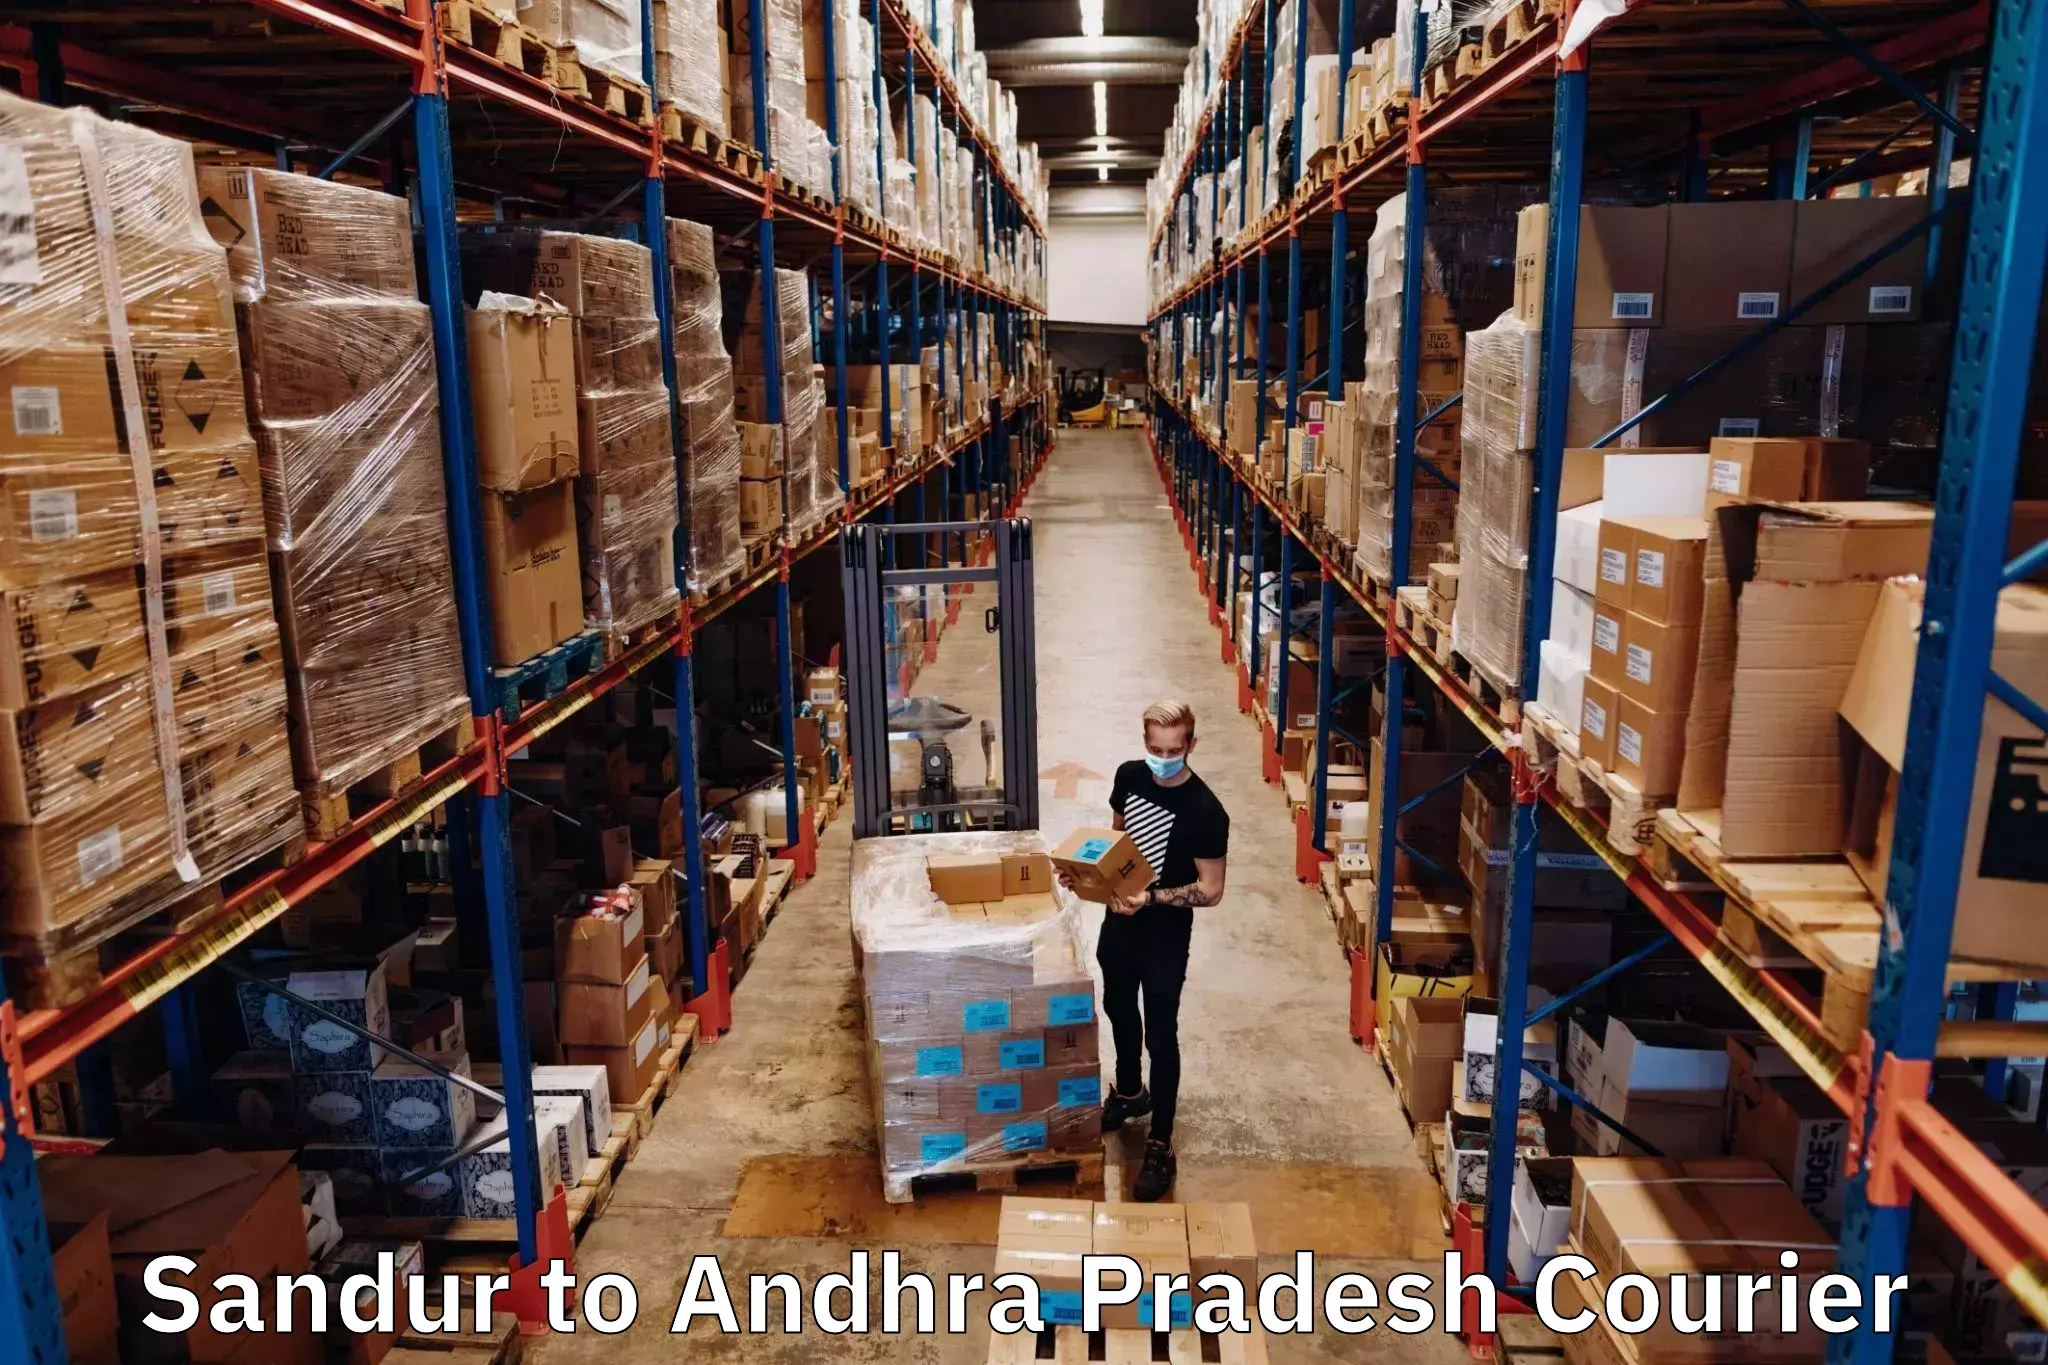 Affordable parcel service Sandur to Madanapalle